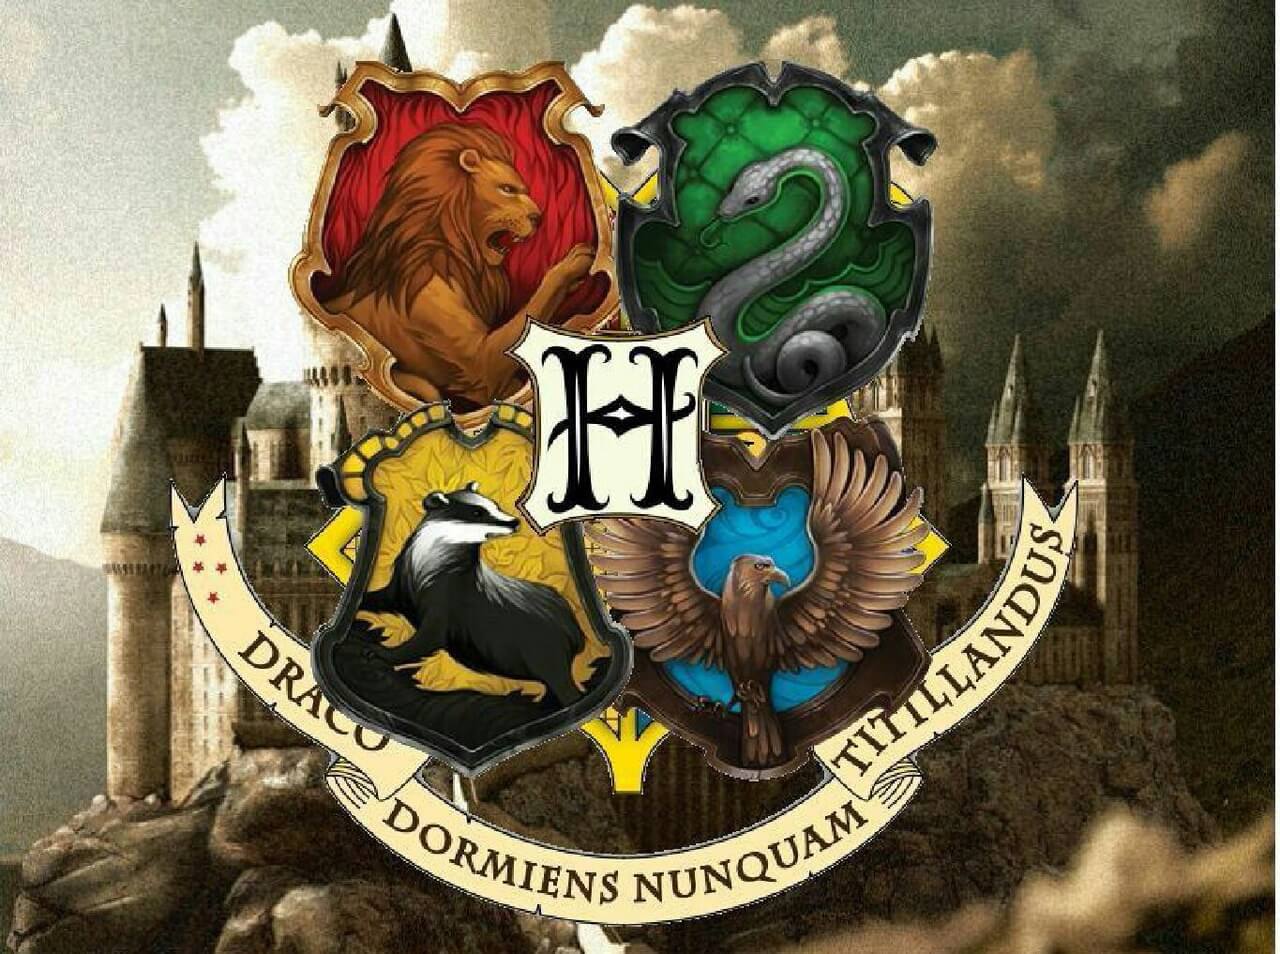 Hogwarts School of Witchcraft and Wizardry.